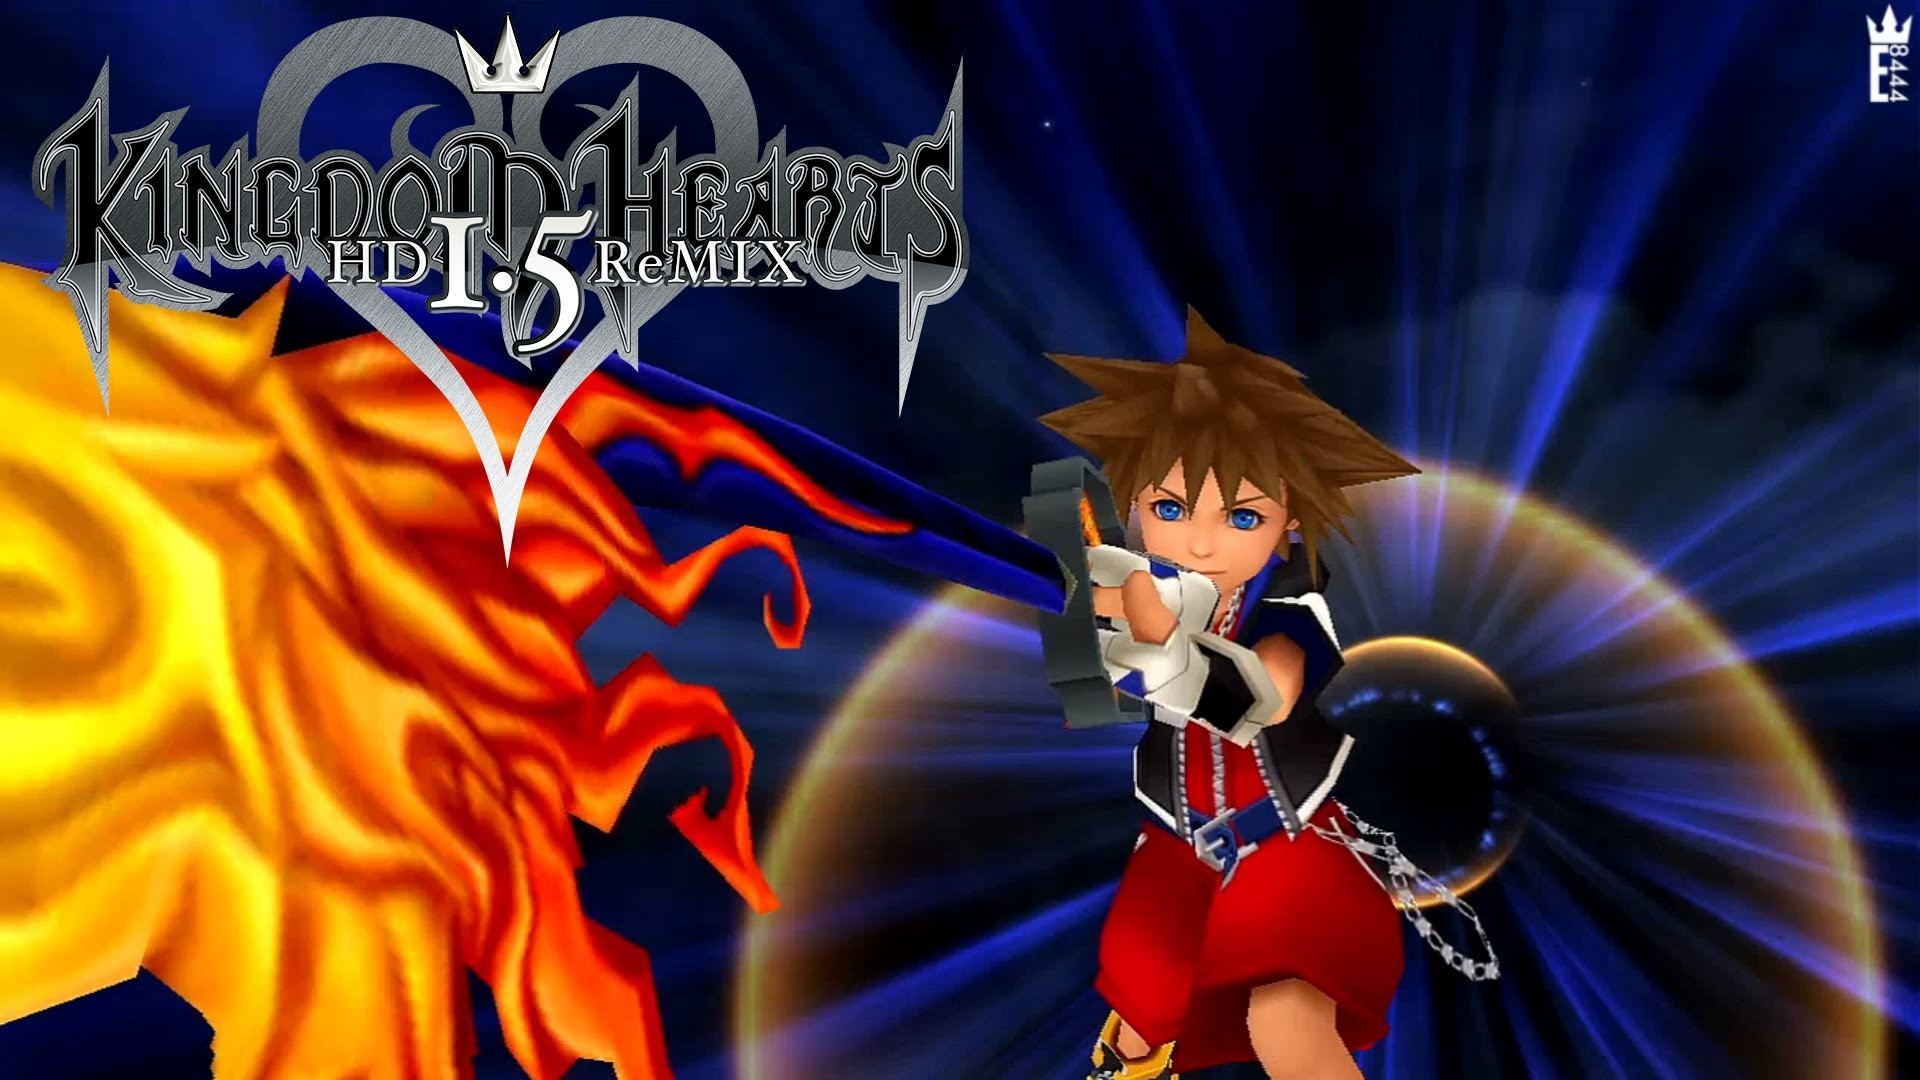 1920x1080 Two New Exclusive Keyblades in KH Final Mix - Kingdom Hearts HD 1.5 ReMIX -  YouTube